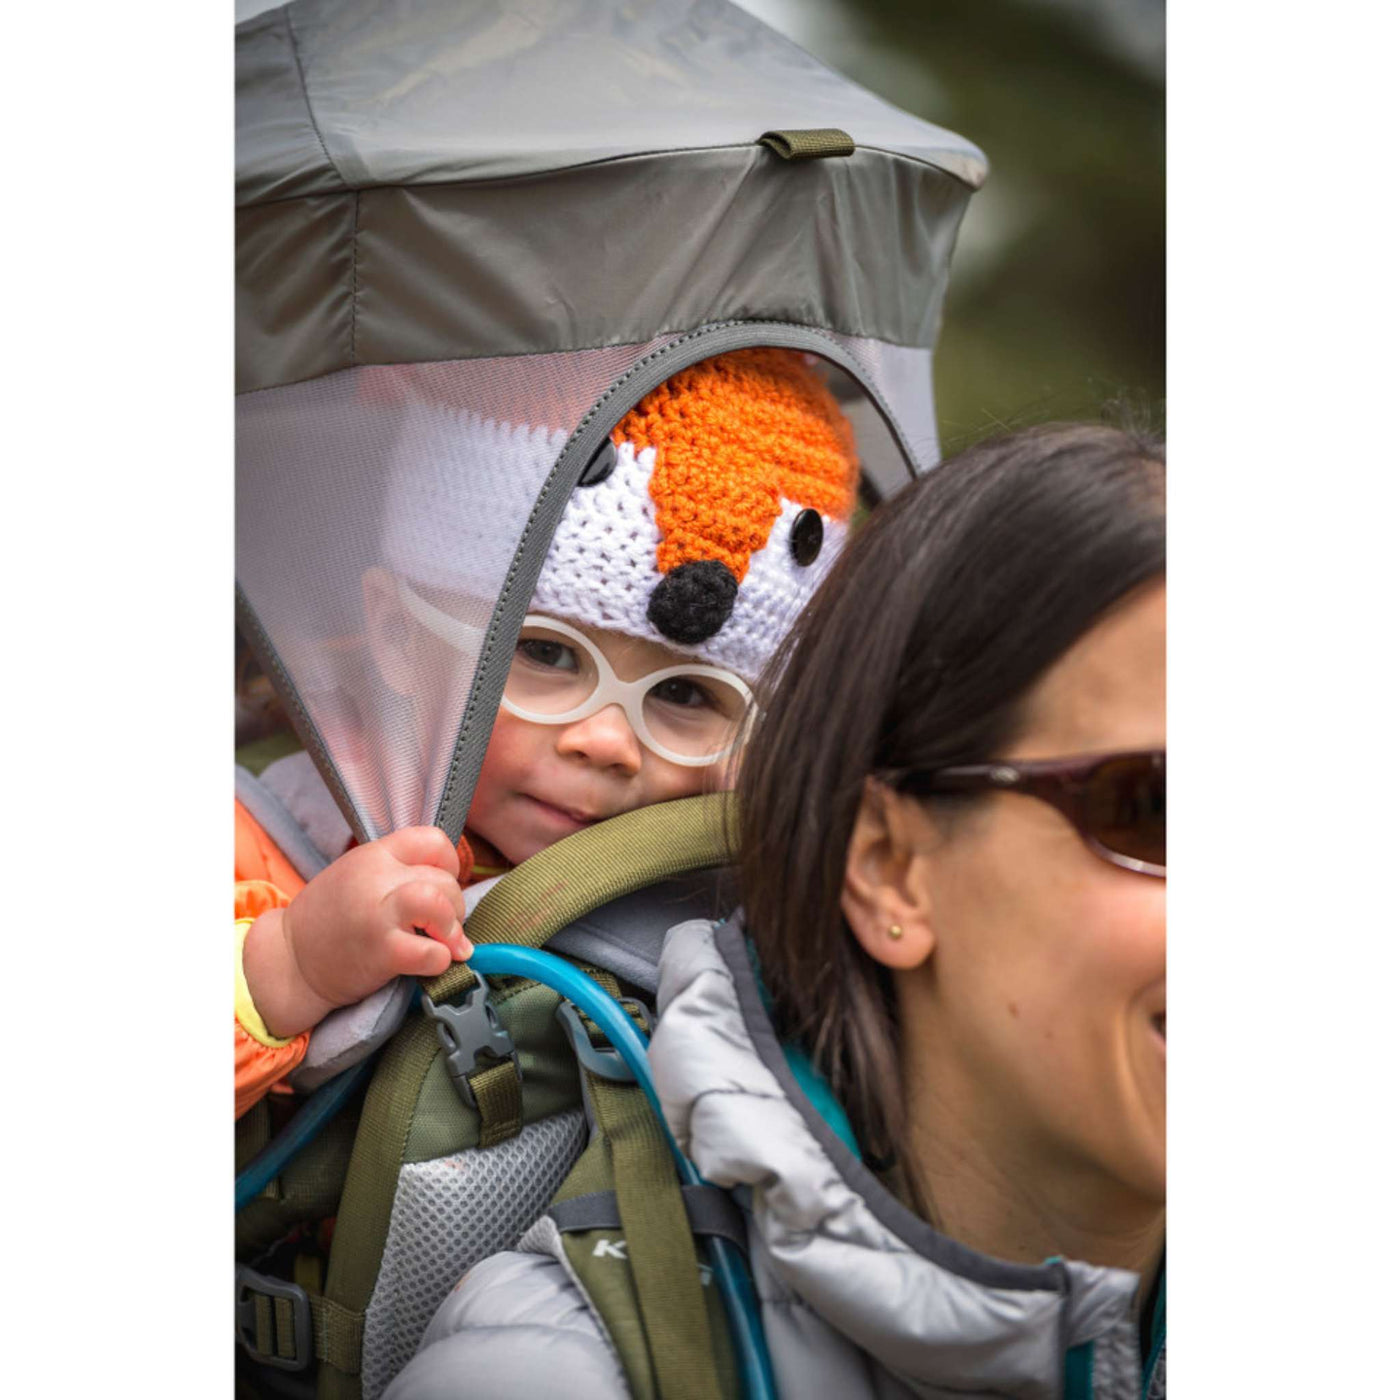 Kelty Journey PerfectFit Sunshade - Grey | Child Carrier Accessory | Further Faster Christchurch NZ